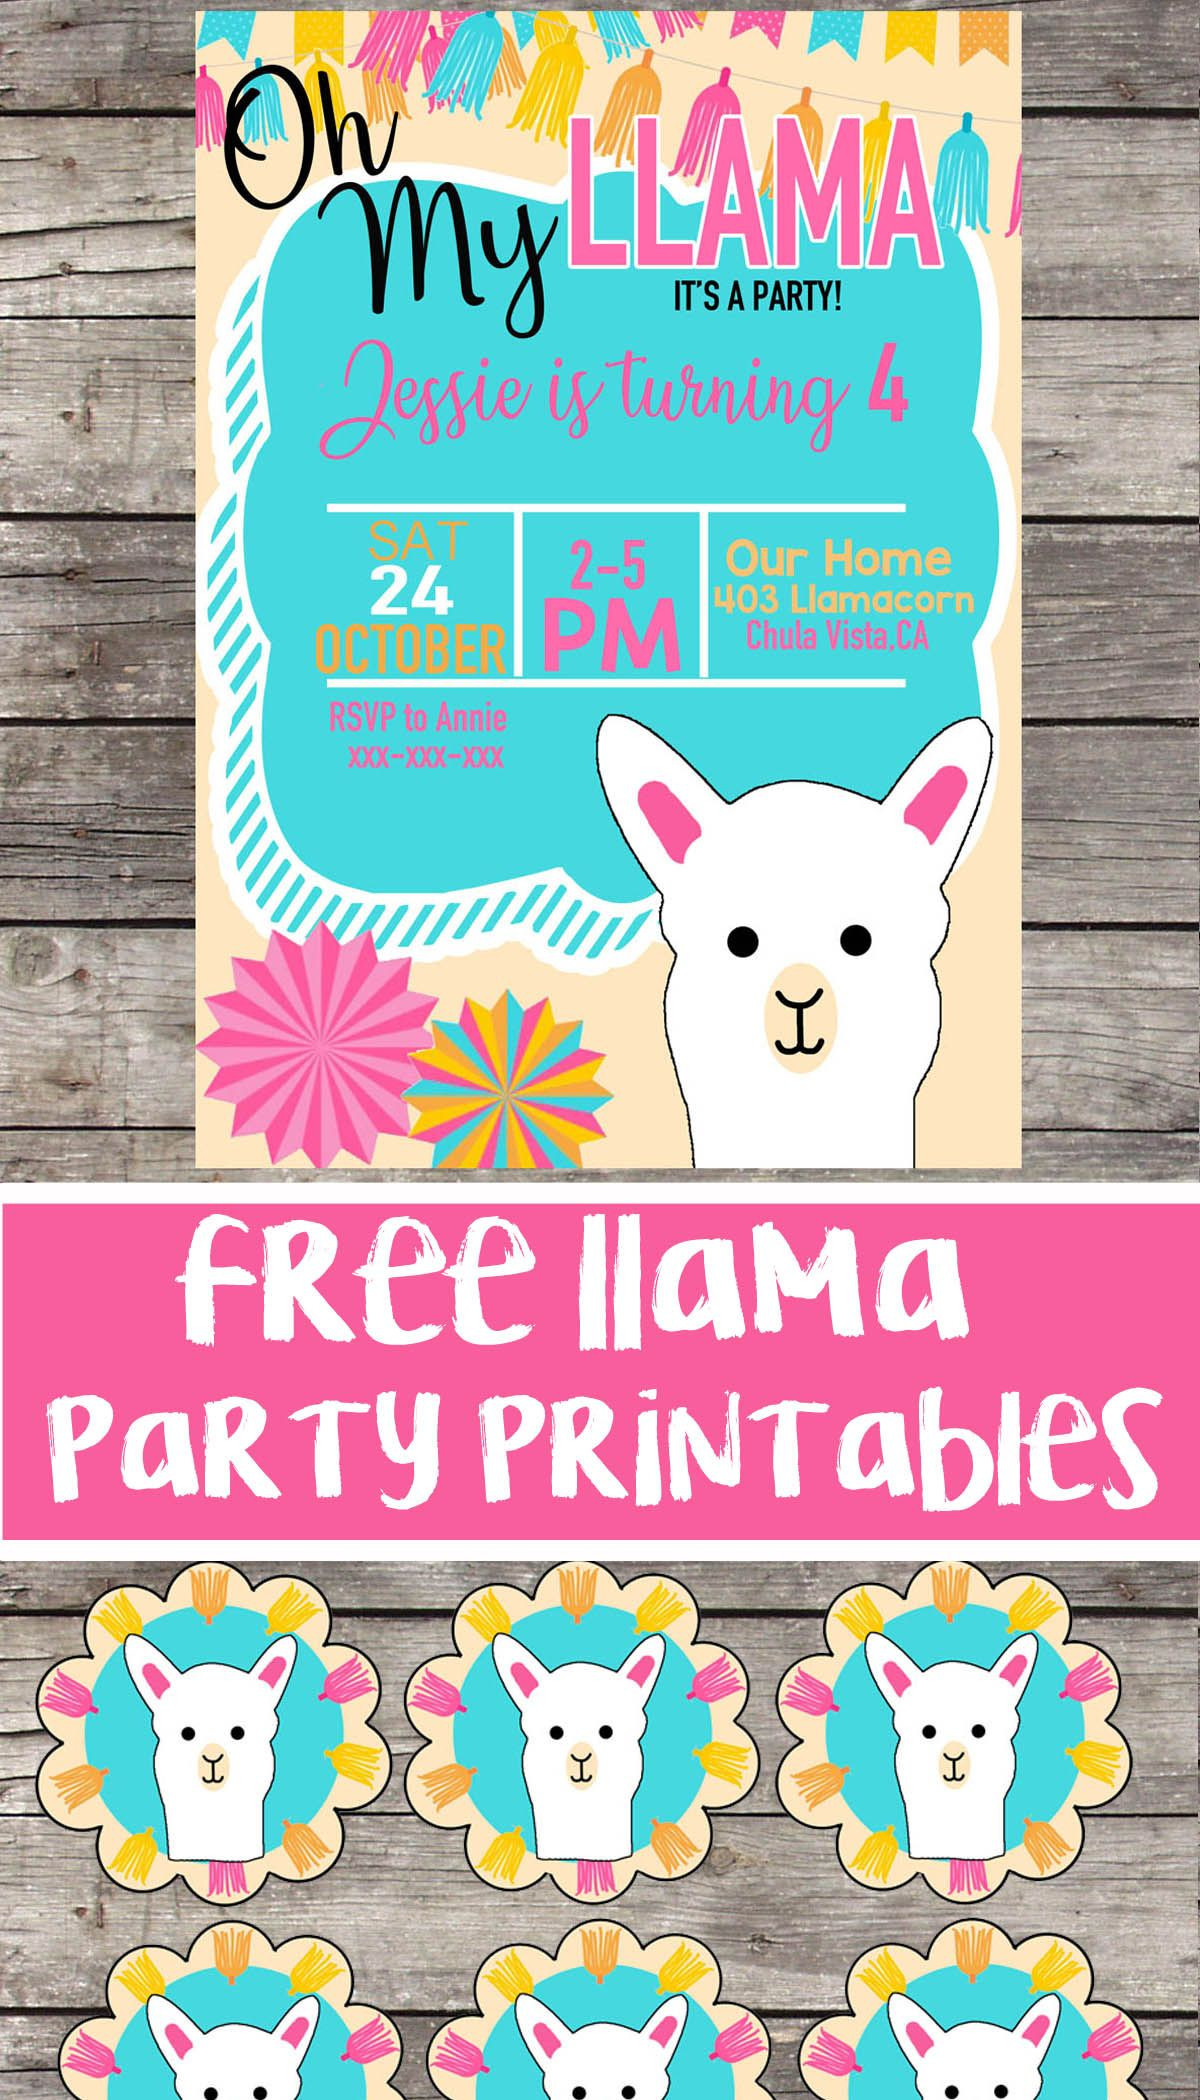 Free Birthday Party Printables Decorations
 FREE Llama birthday party printable files